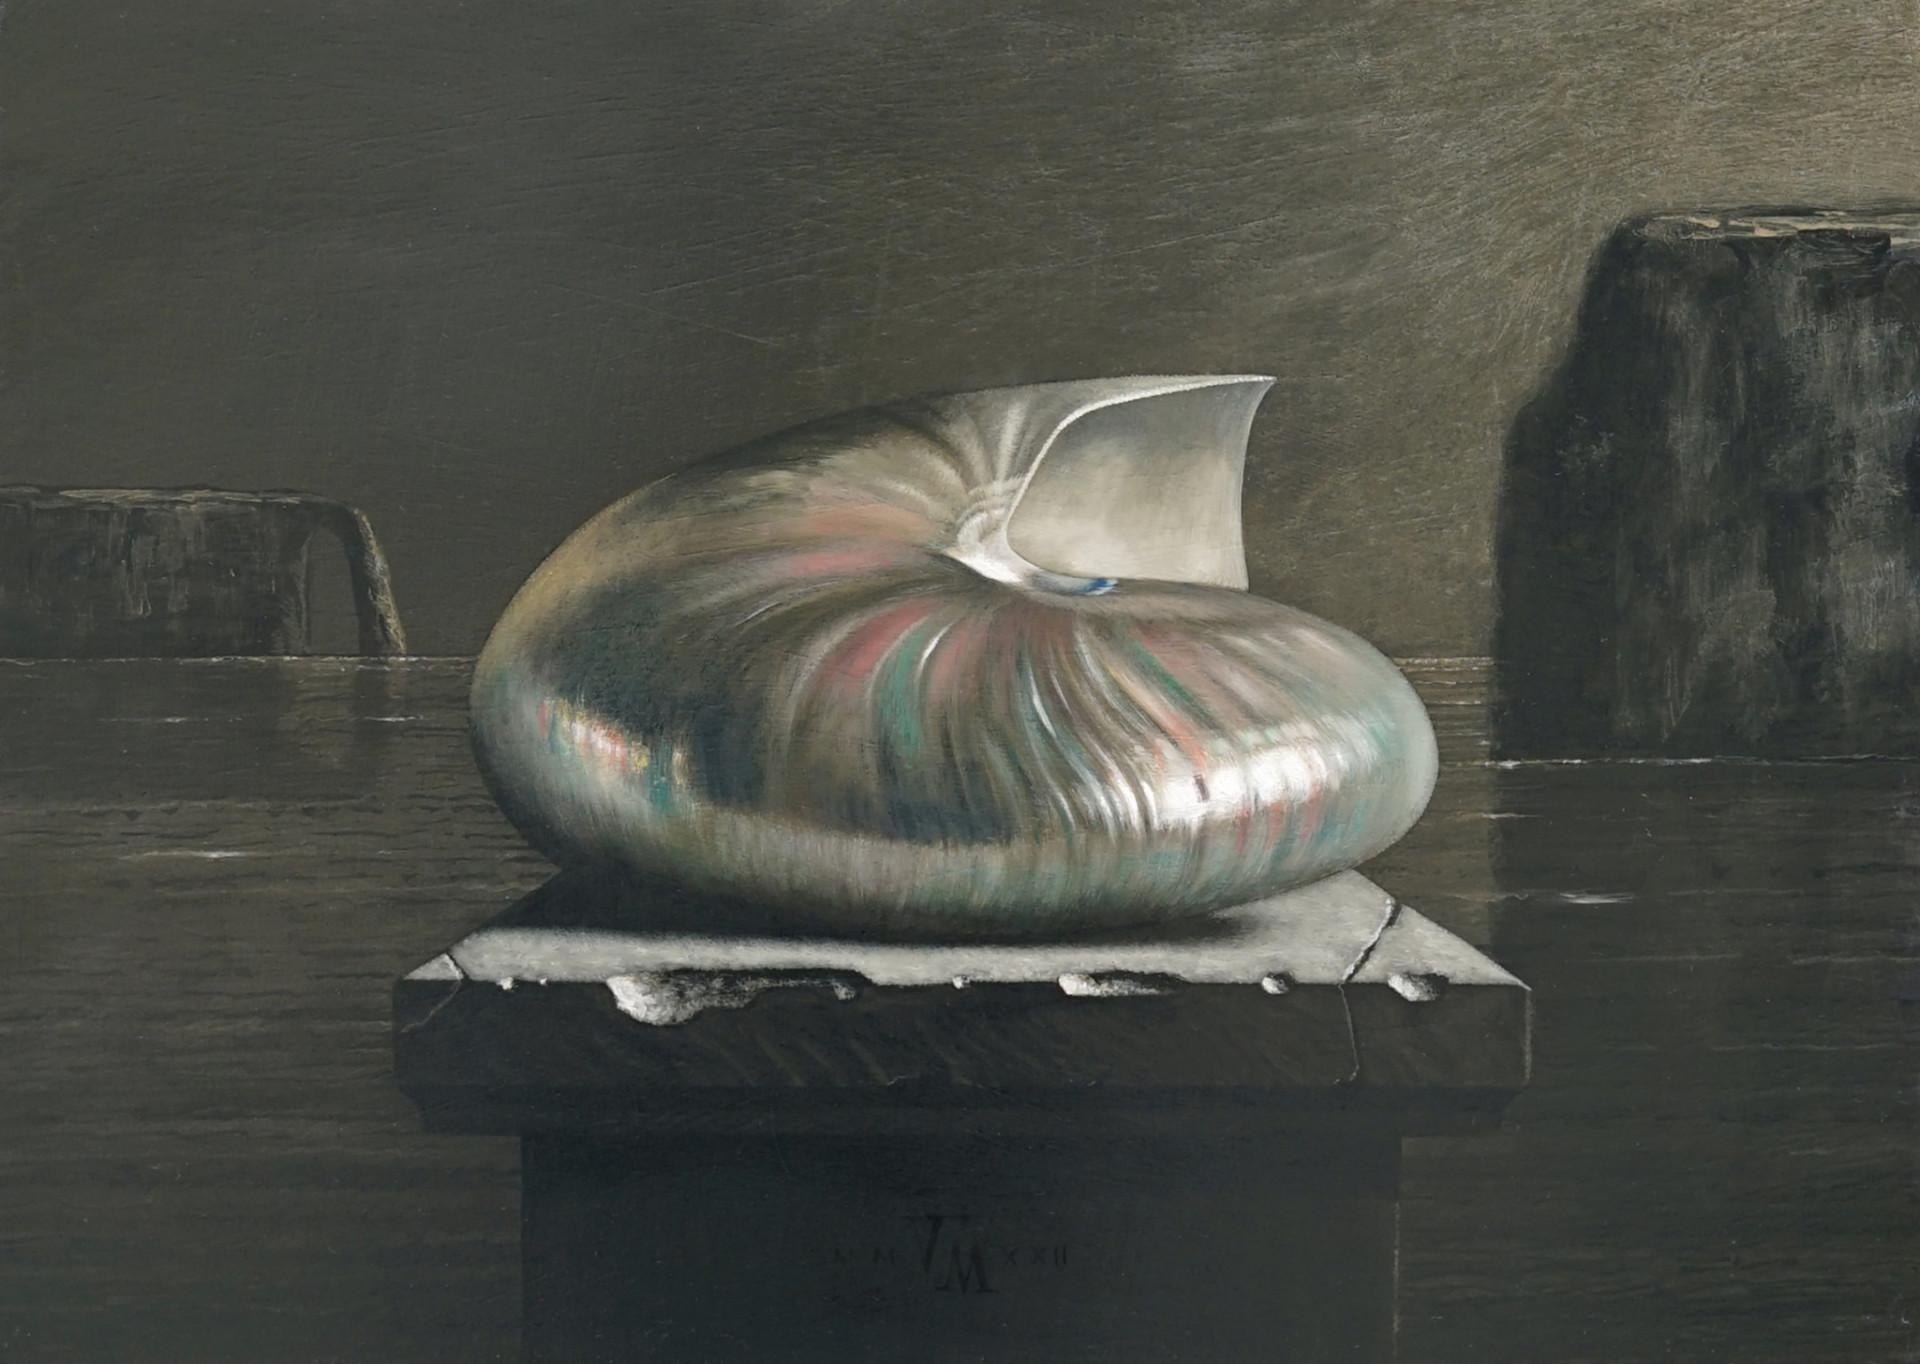 Nautilus 2 Oil Painting on Panel Still Life Shell Framed In Stock. Sizes including frame.
Born in Den Helder, The Netherlands in 1976. Victor Muller is a young artist with a considerable and amazing oeuvre. He creates a world he wants to live in, a